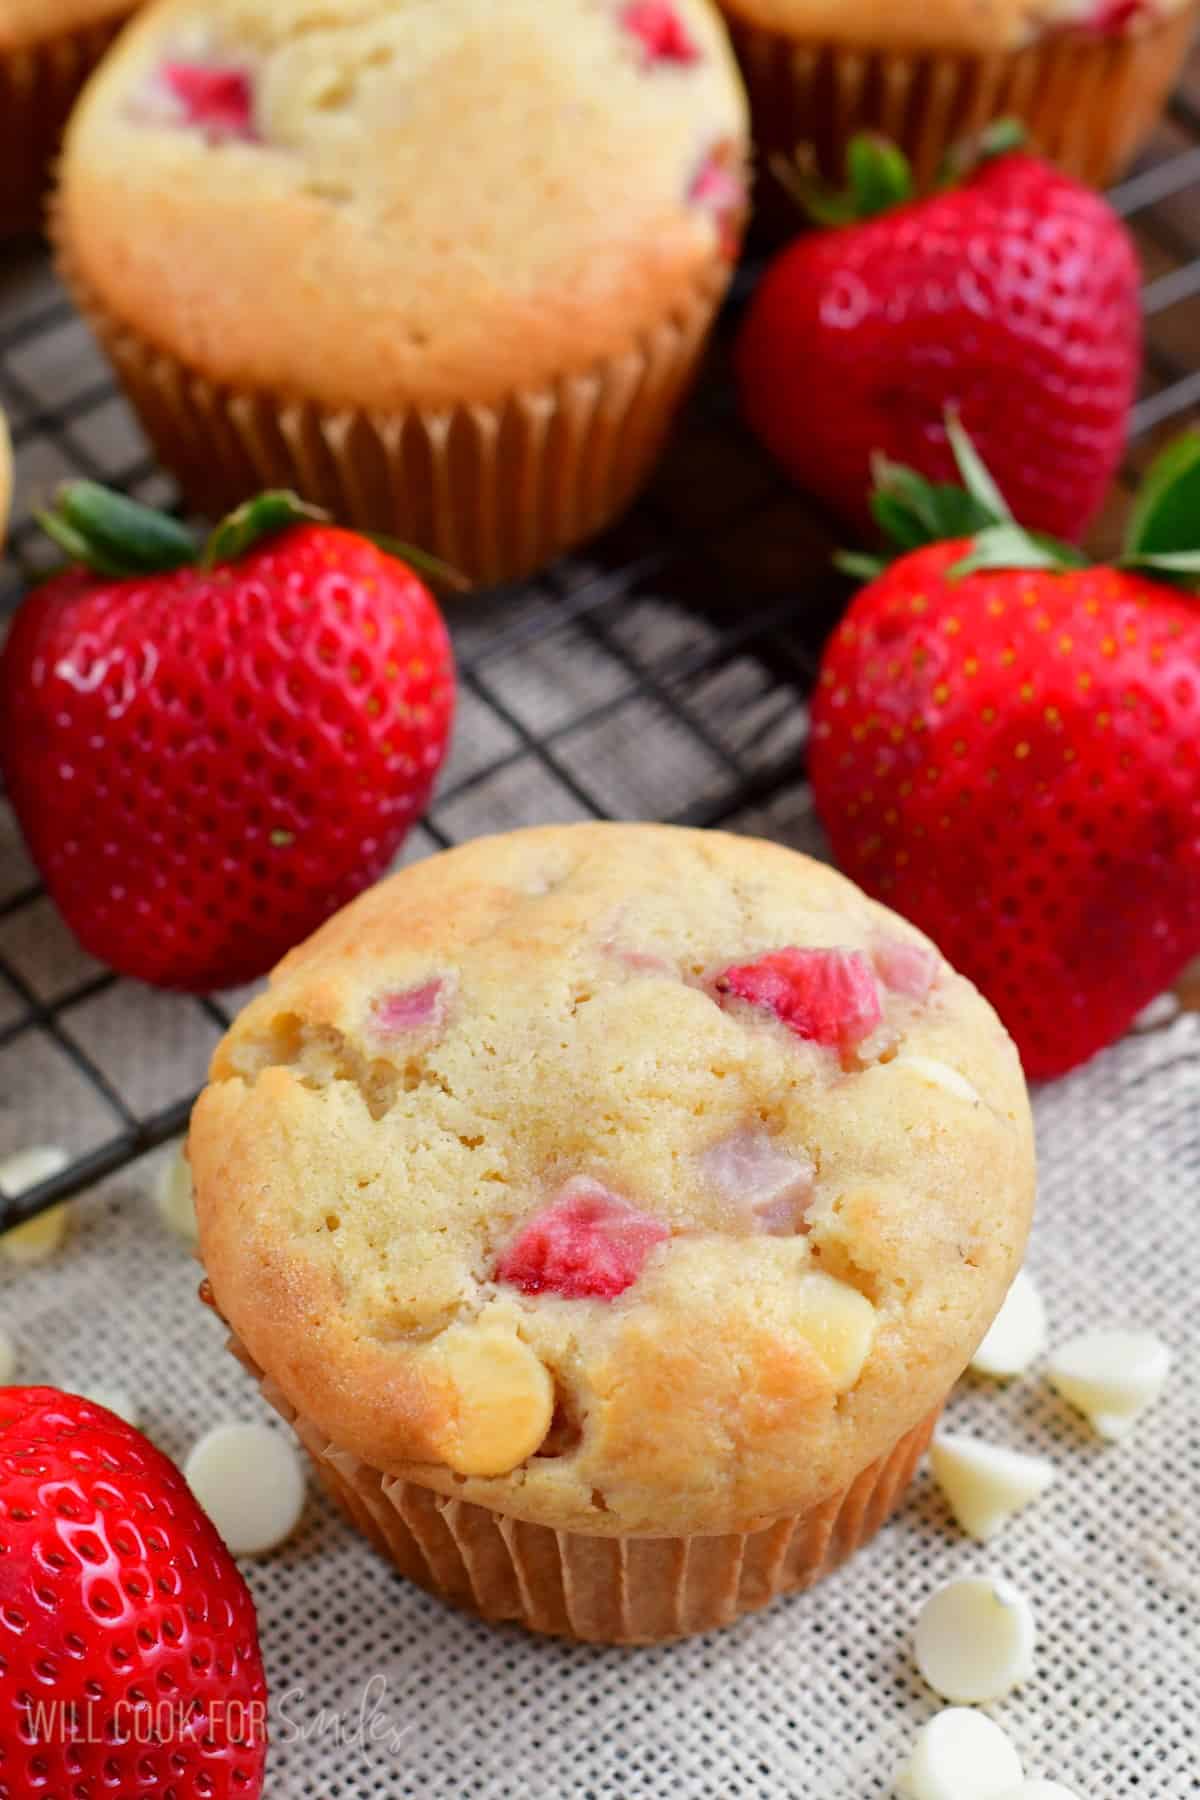 White chocolate chip strawberry muffins with white chocolate chips and strawberries around it.